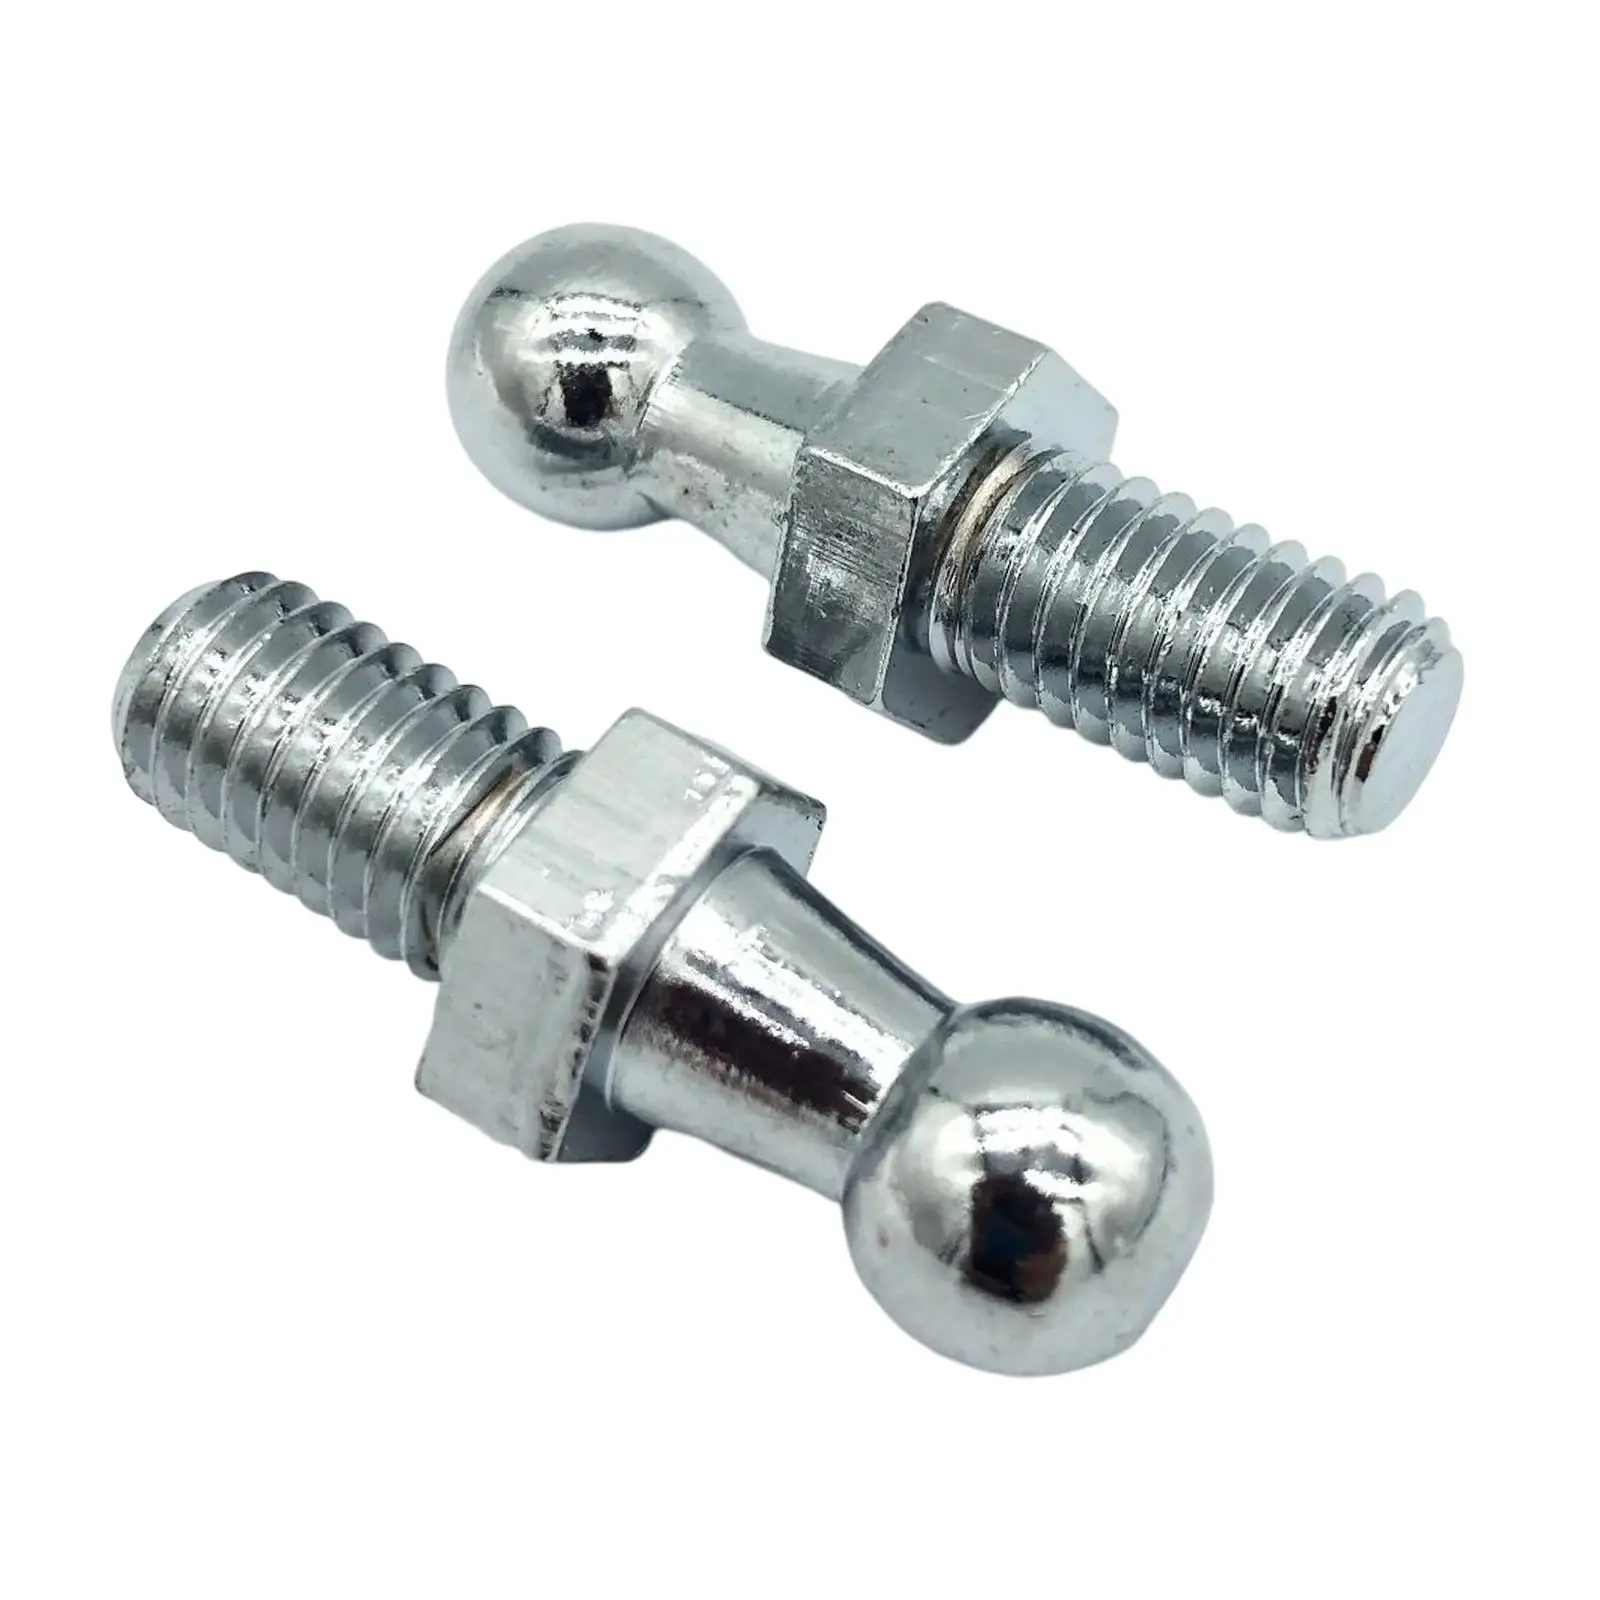 2x Ball Stud Pin Bolt Accessories Easy to Install Replaces M8 M6 10mm Durable